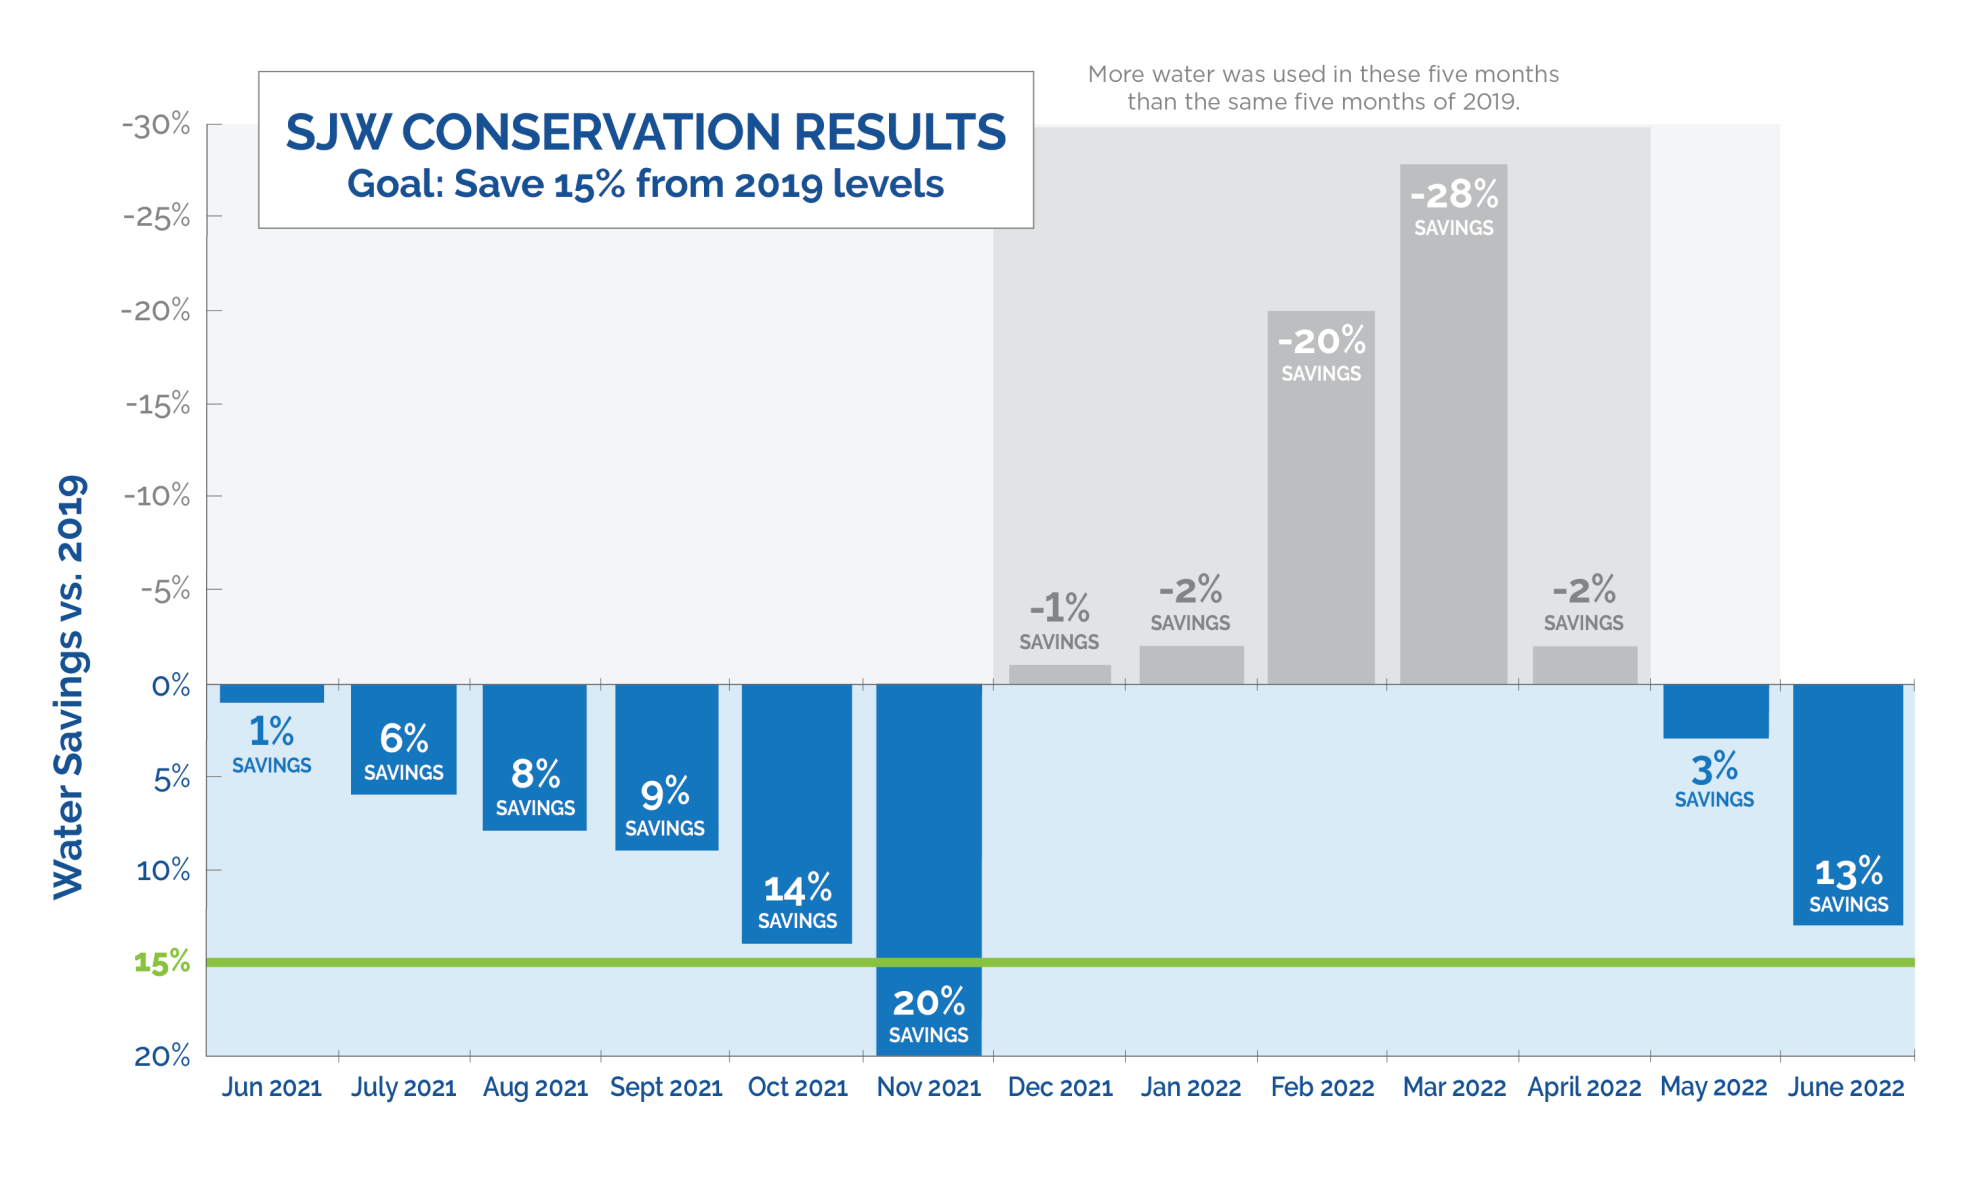 Graph showing water conservation results through June 2022